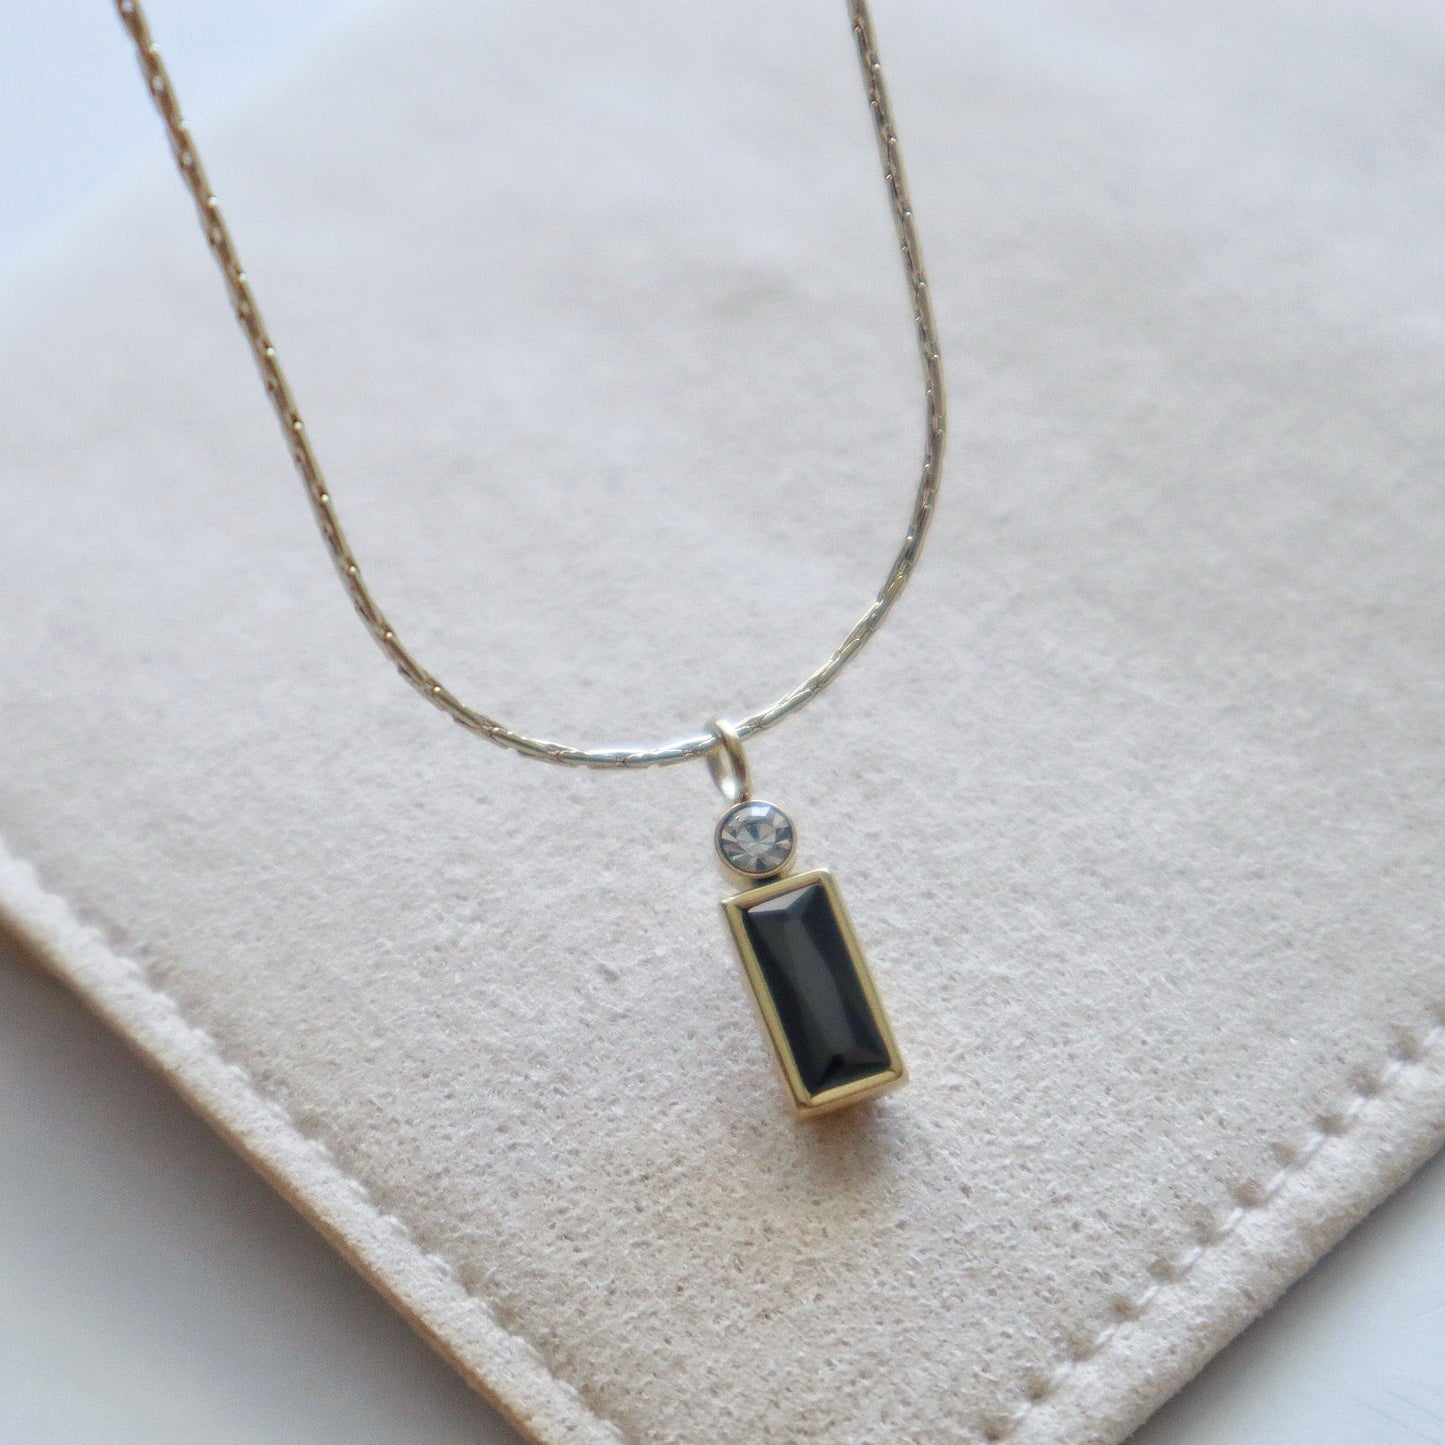 Claire Necklace | Black Gem Pendant Necklace - JESSA JEWELRY | GOLD JEWELRY; dainty, affordable gold everyday jewelry. Tarnish free, water-resistant, hypoallergenic. Jewelry for everyday wear